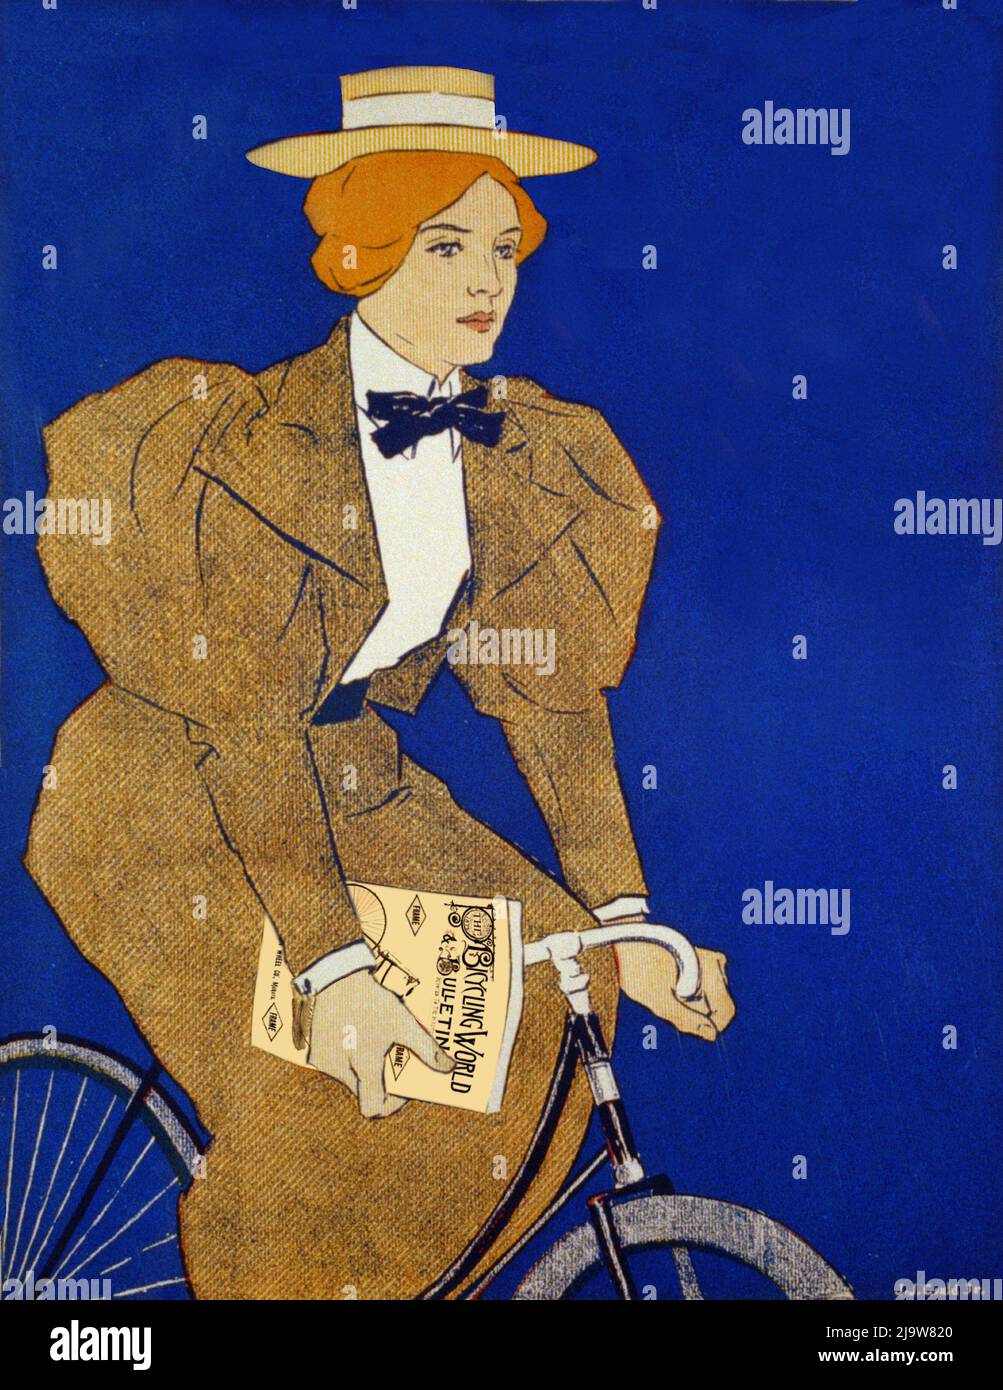 An illustration of a woman on a bicycle with a Cycle Manual in her hand. The image by Joseph J Gould (1880-1935) is a  detail from a poster for Lippincott's, an American monthly literary magazine published in Philadelphia from 1868 to 1915. Stock Photo